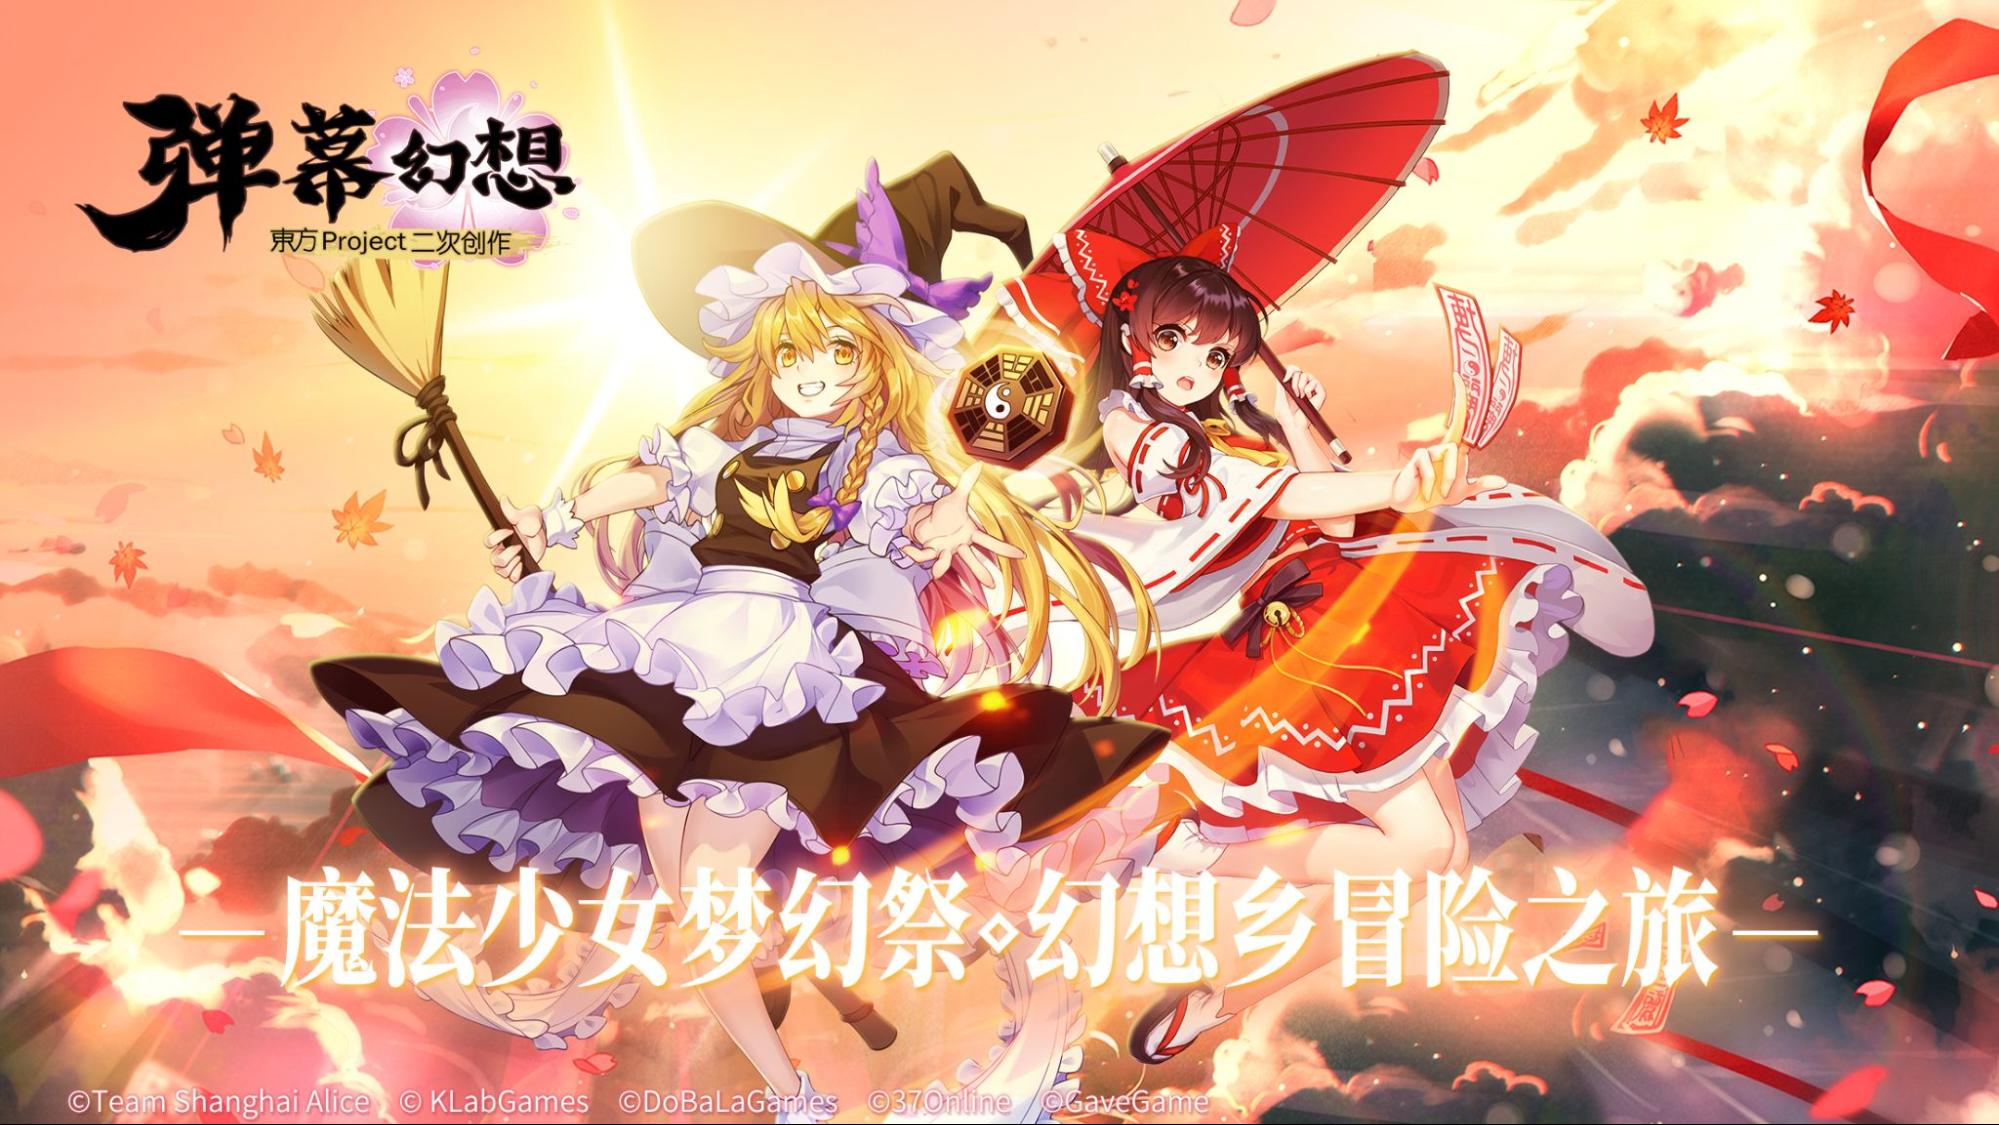 KLab announces officially licensed Touhou Project Shoot 'em for iOS and Android platforms